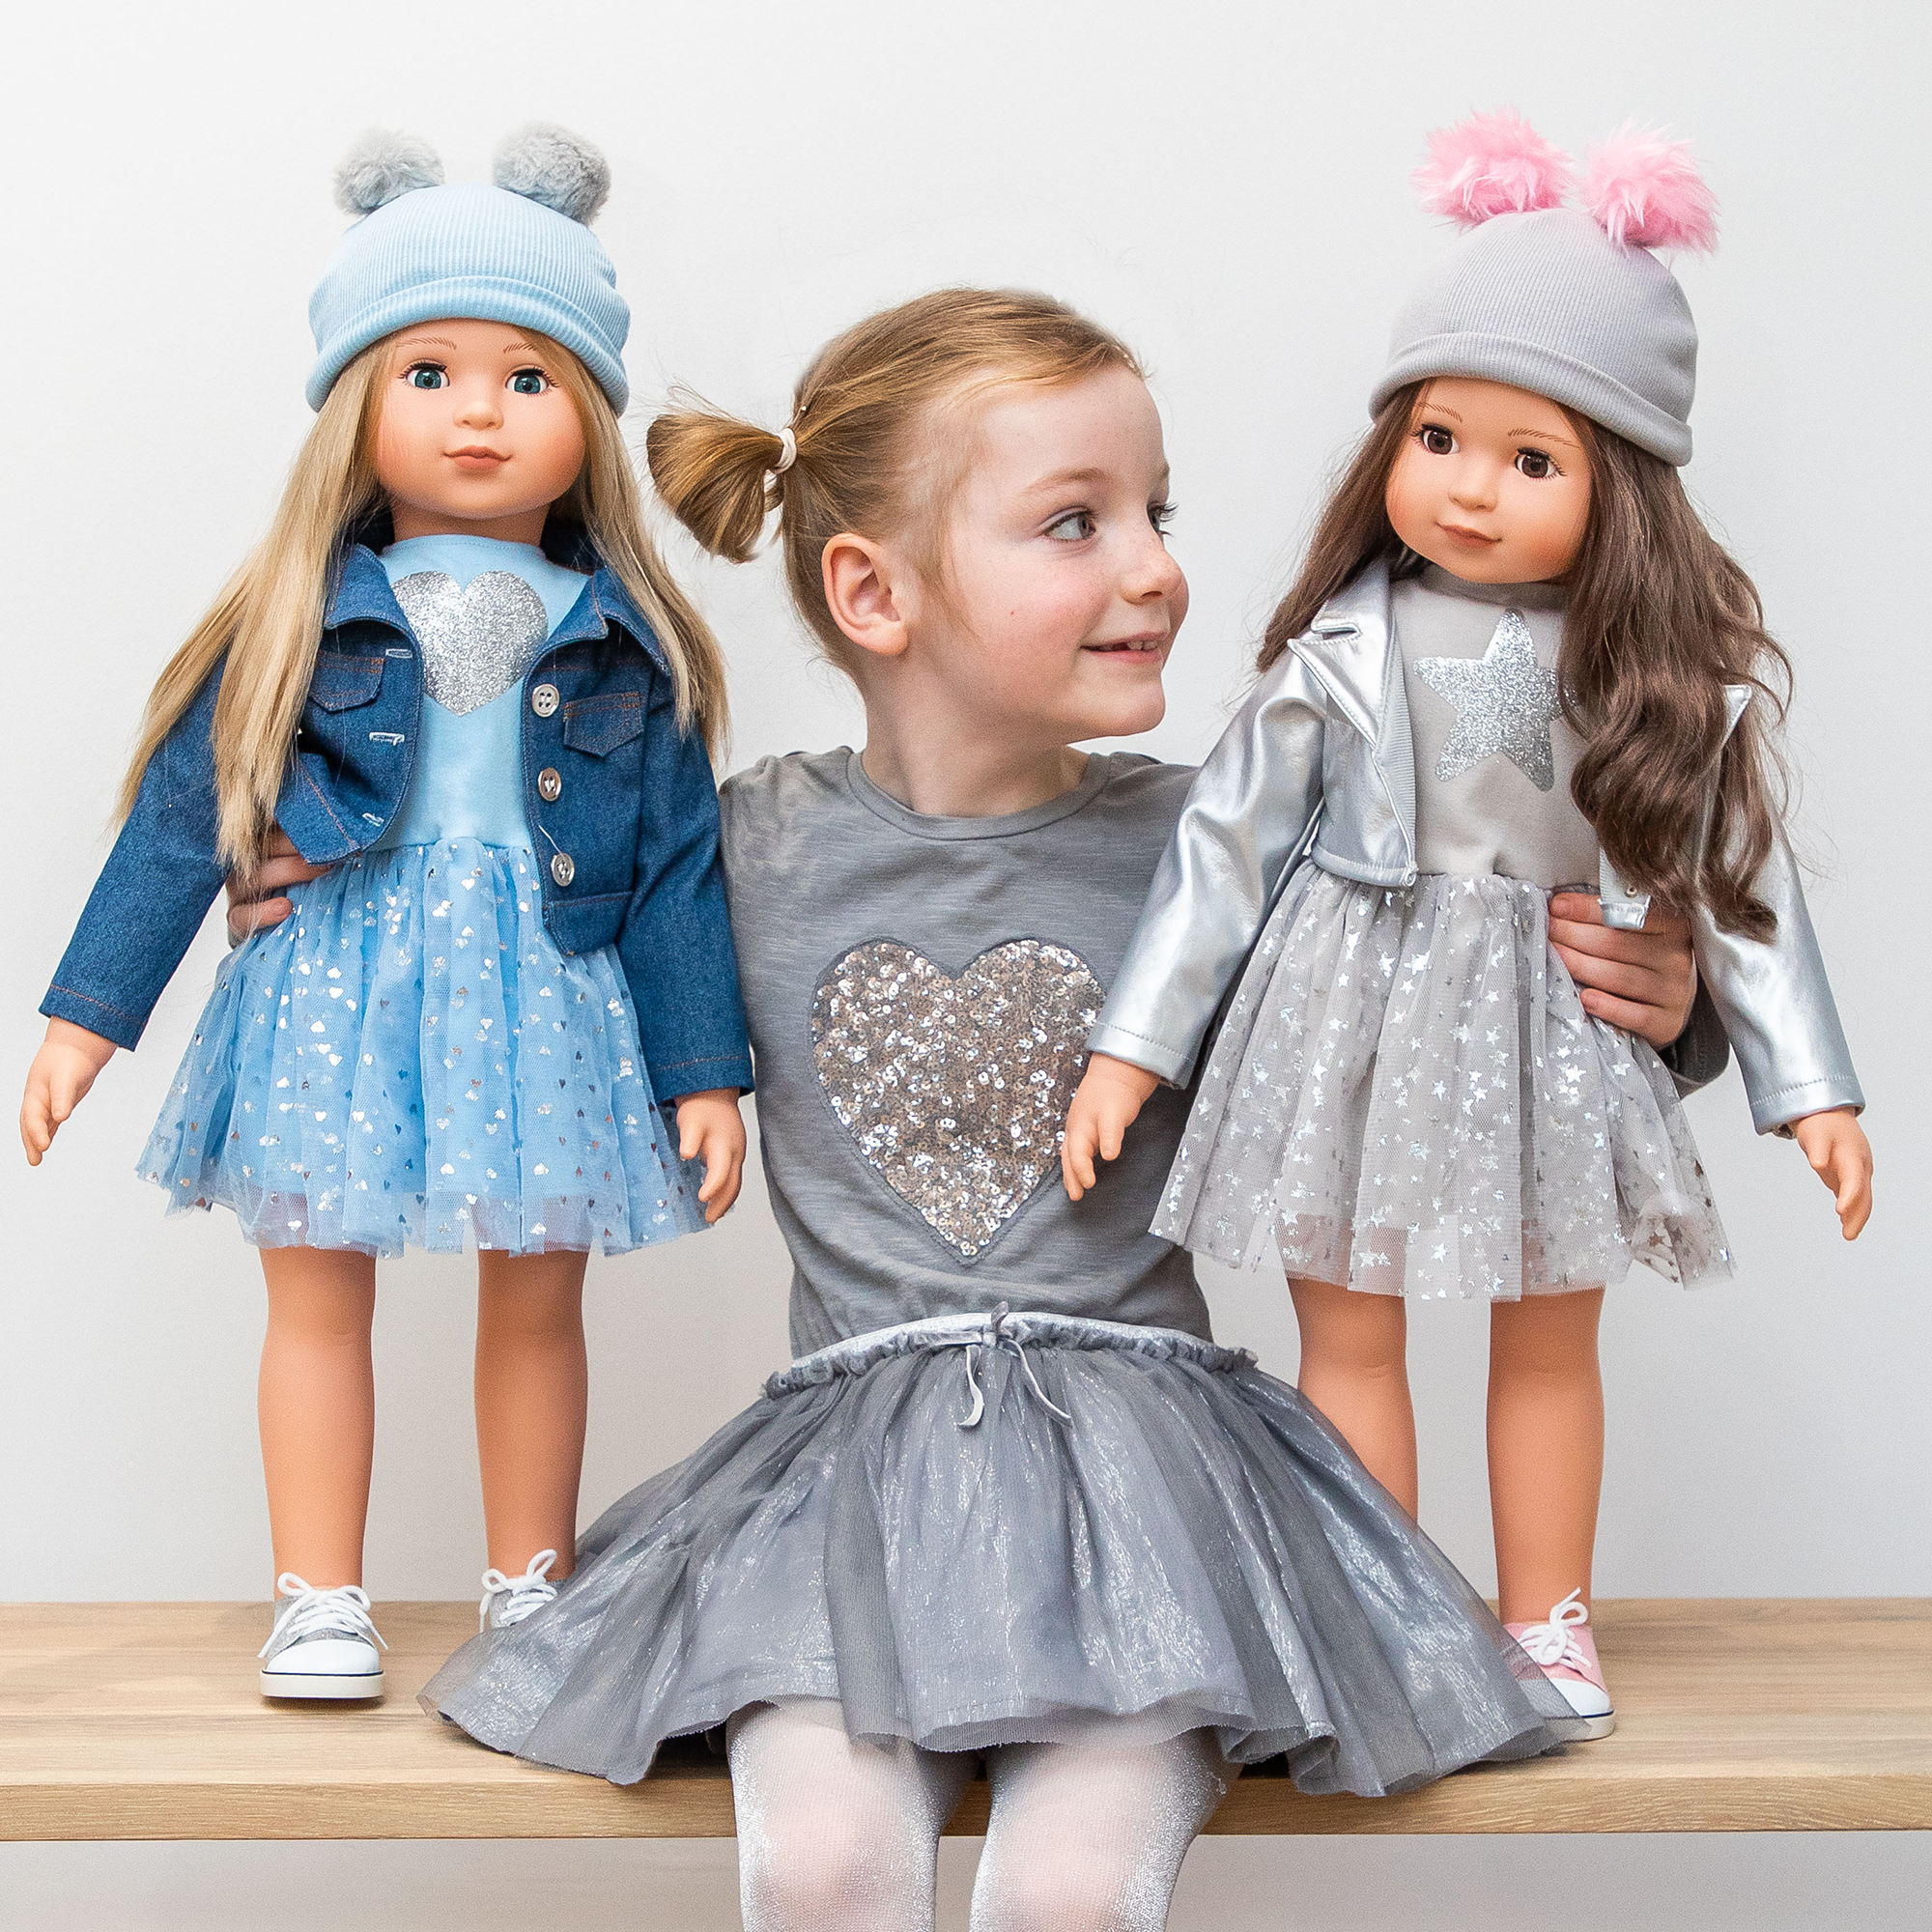 26inch/68cm Play 2020 New Collection 2020 Designafriend Best Friend Lily Doll 